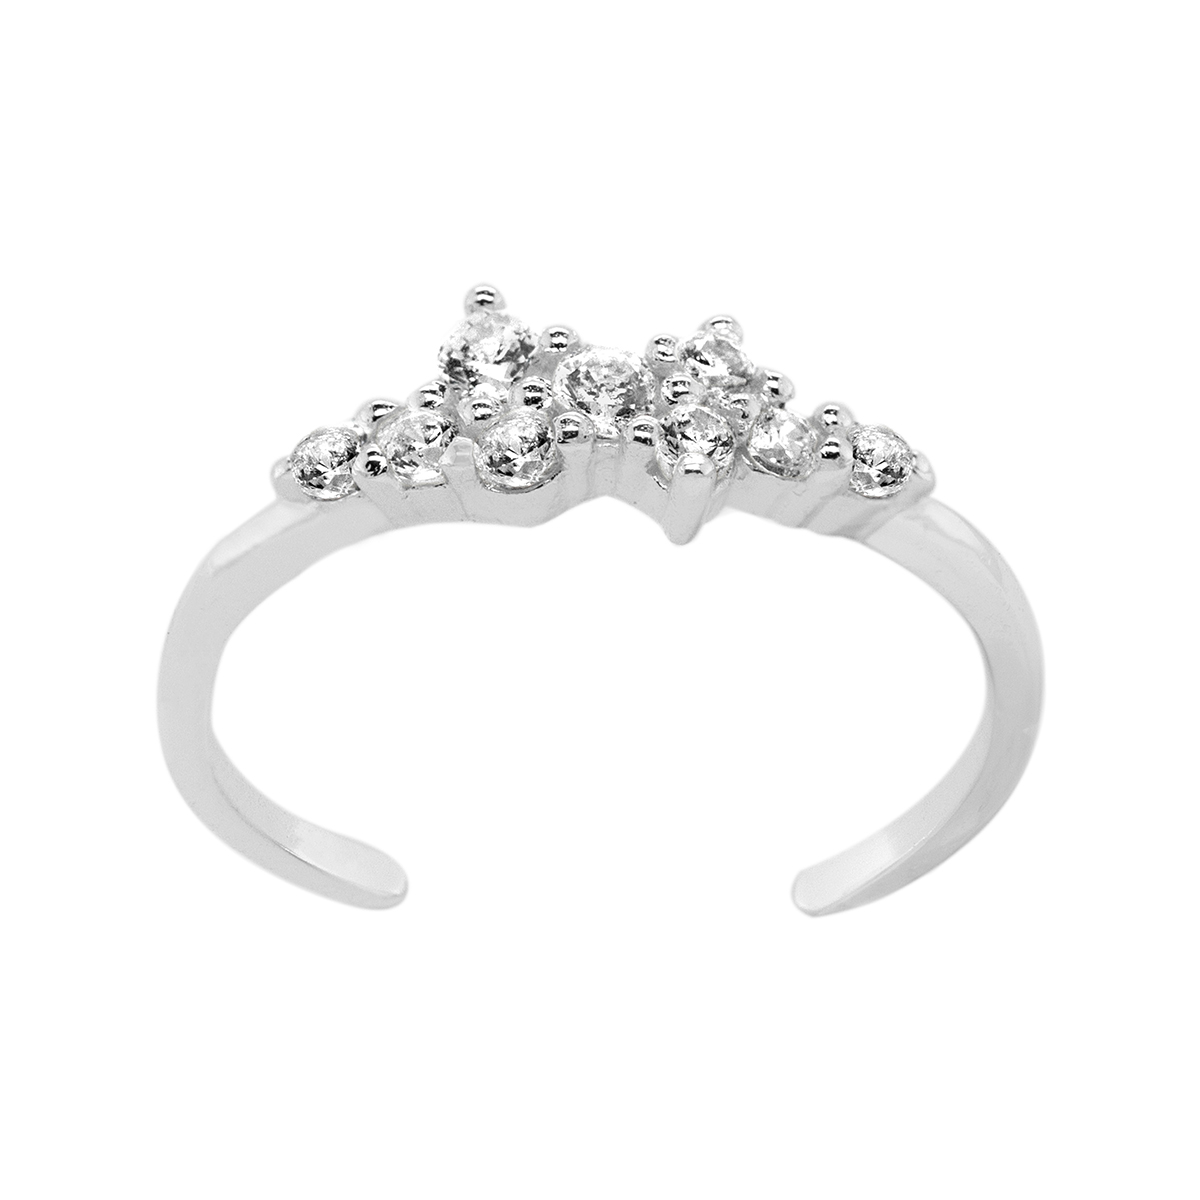 Barefootsies Clear CZ Cluster Adjustable Toe Ring